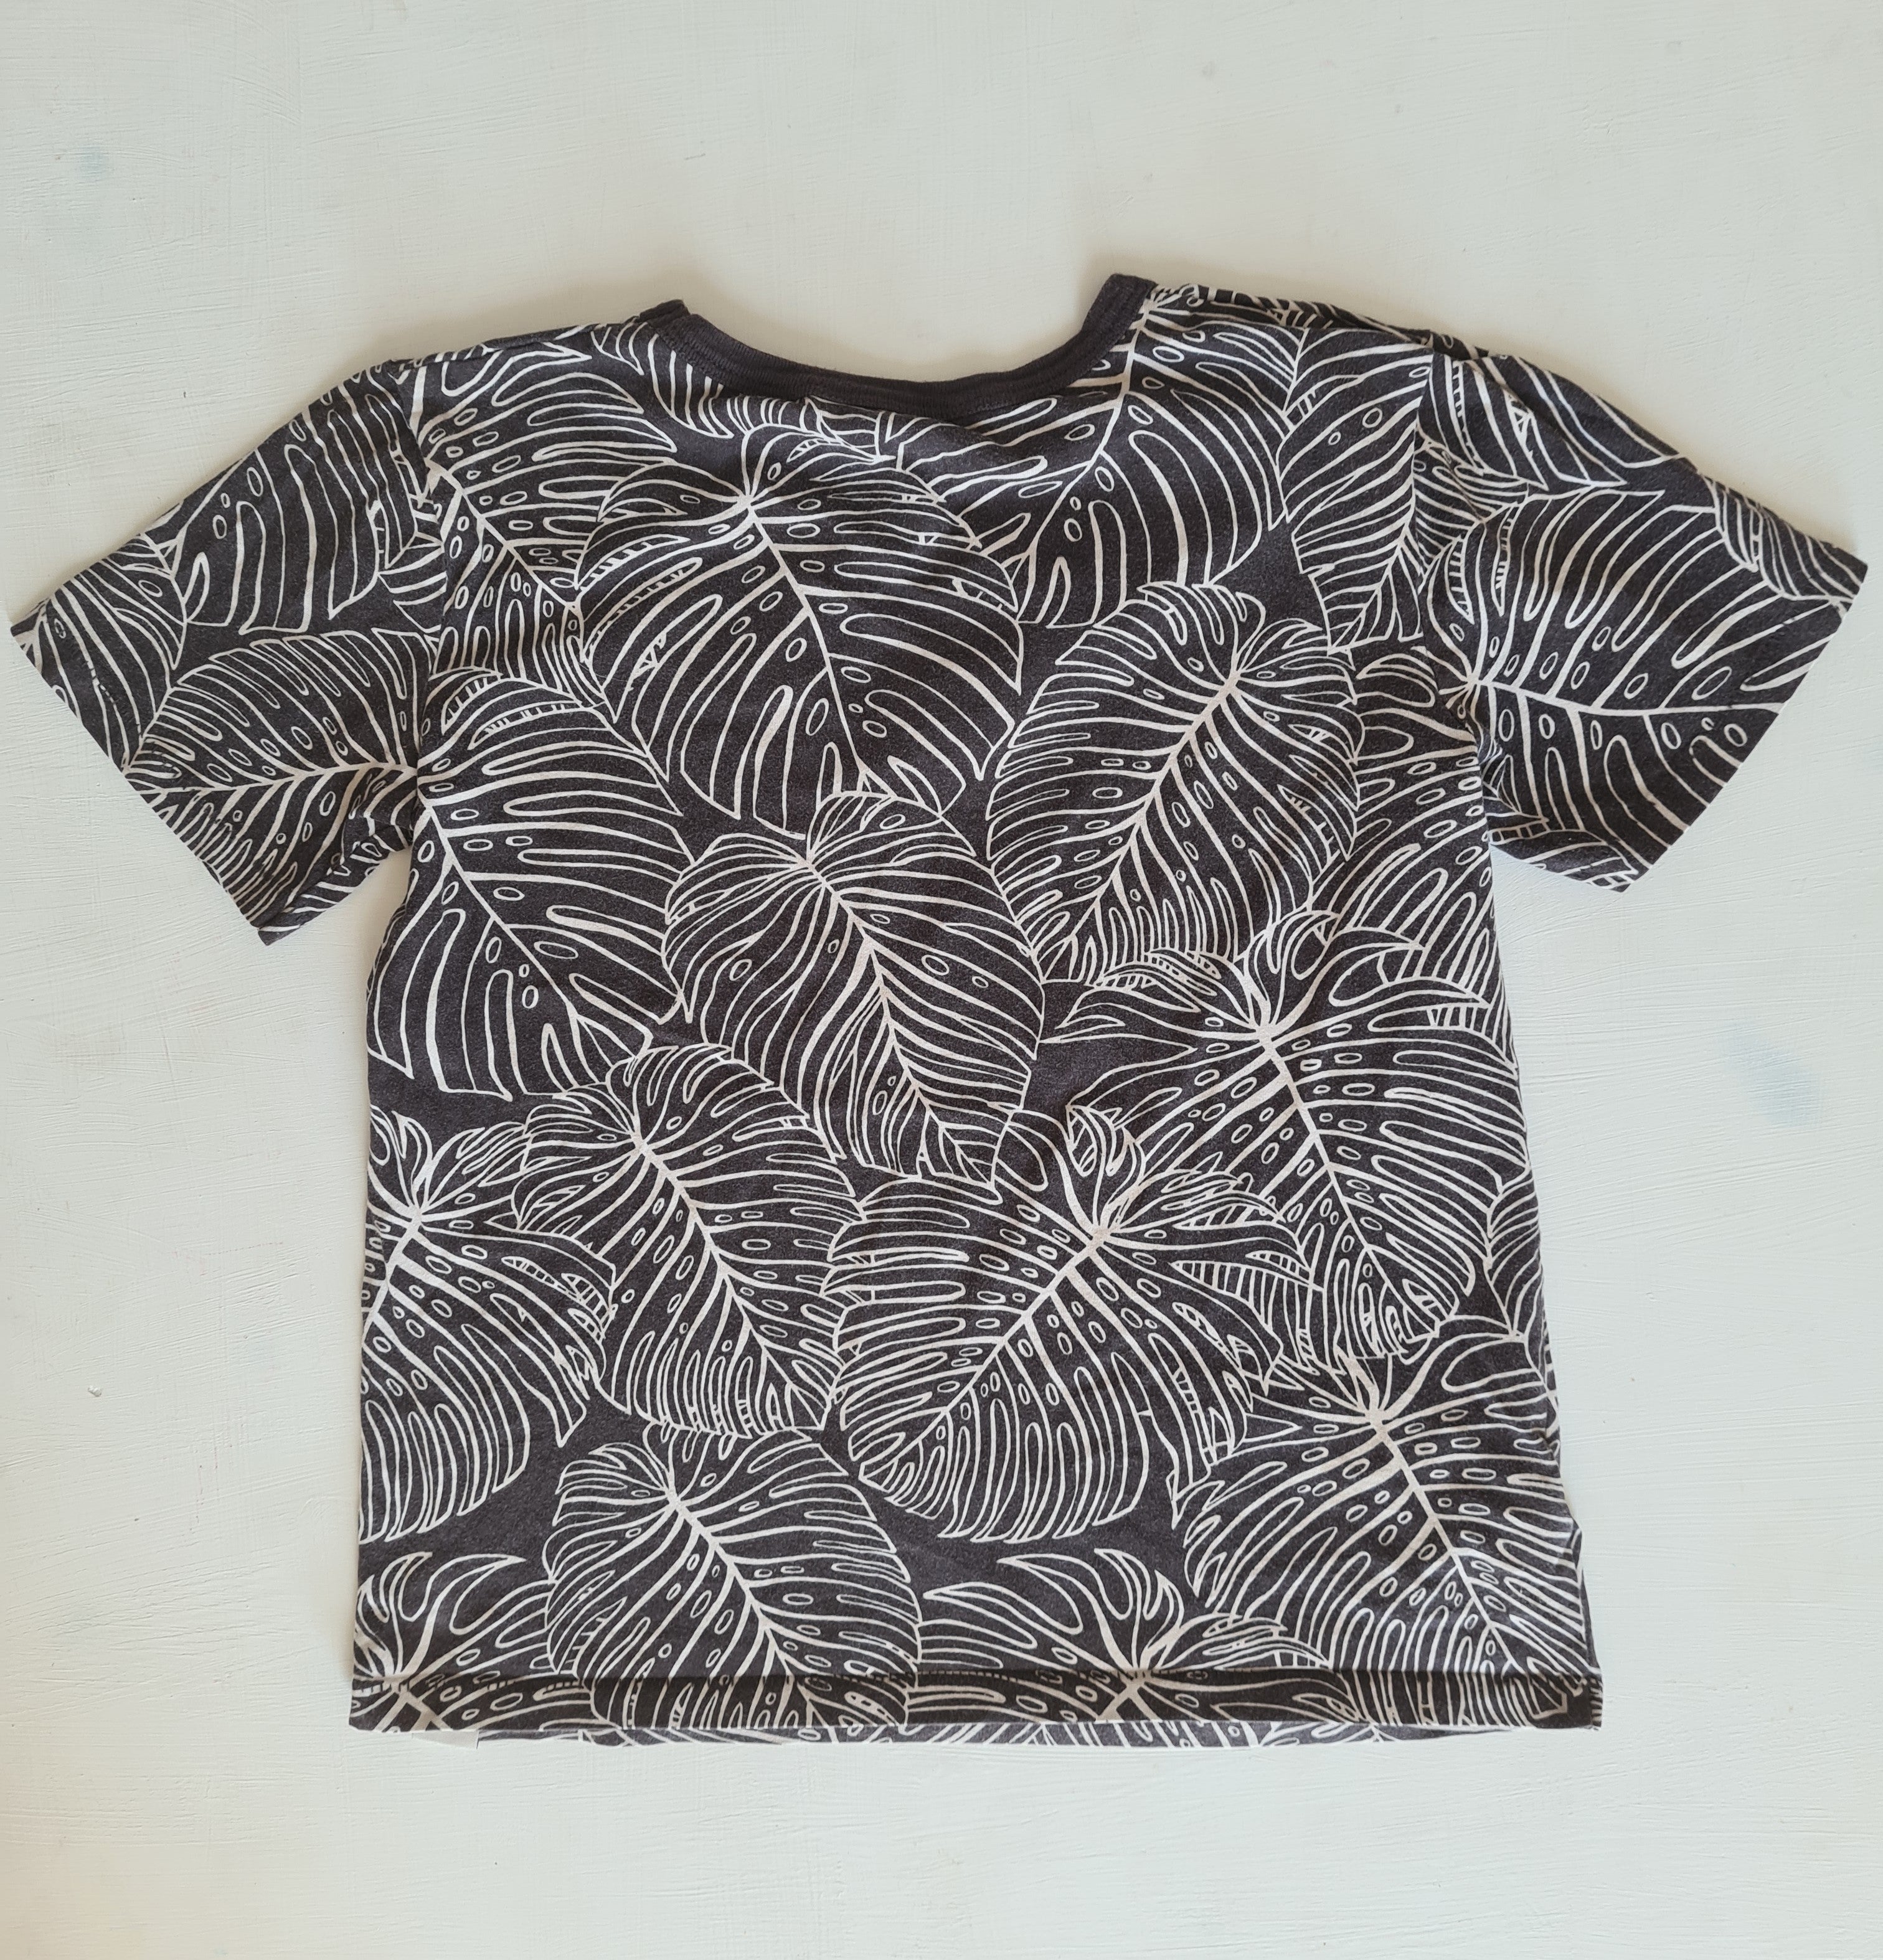 THRIFT Country Road - Black Palms tshirt Size 7